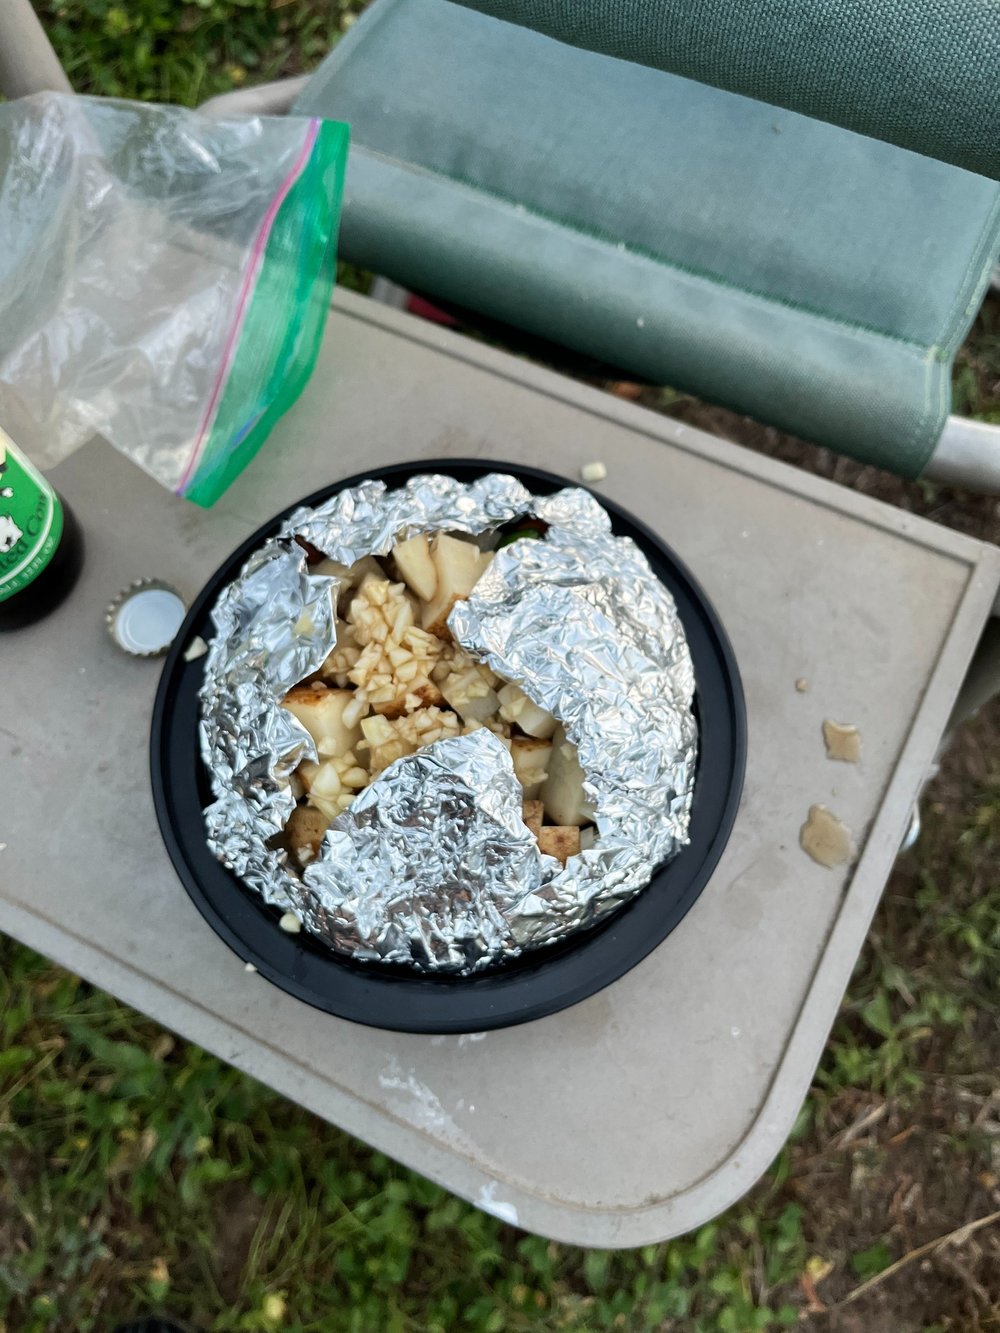 Messy food on a table. Sometimes, camping dinner sometimes isn't pretty. 